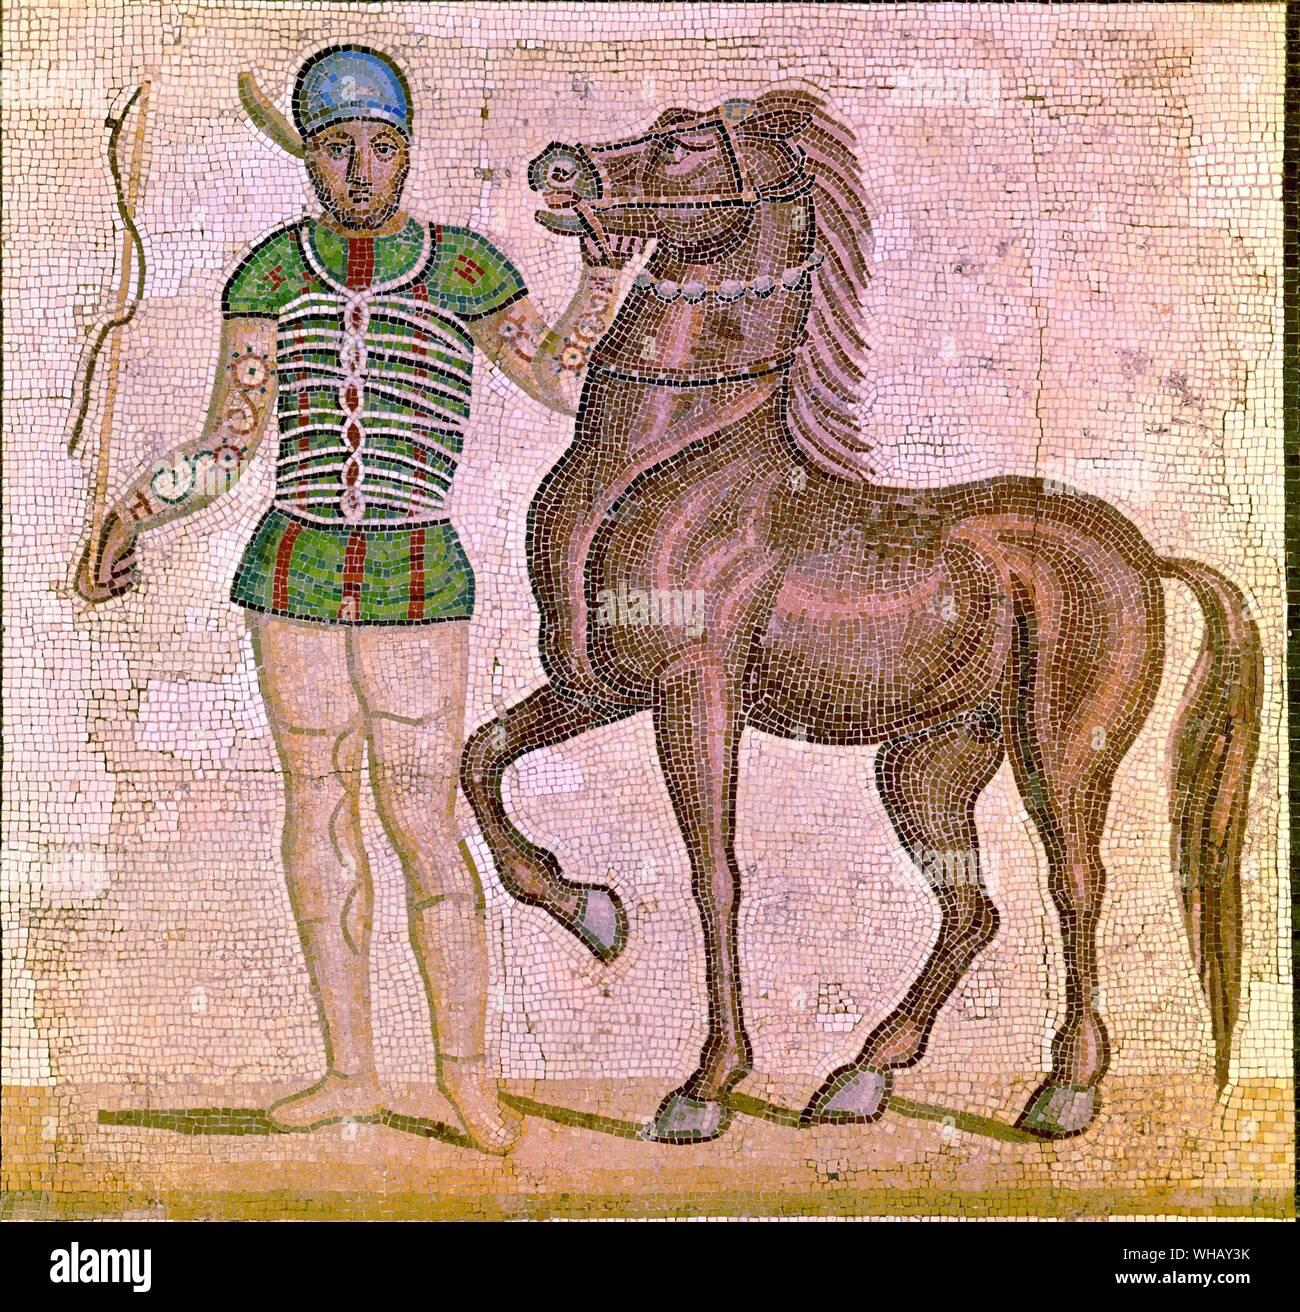 Roman Mosaic:The racing colours. Located in: Museo delle Terme, Rome. The History of Horse Racing by Roger Longrigg, page 18. . Chariot Coachman and Horse. This mosaic depicts a coachman who drove horses in the chariot races held in the amphitheatres of ancient Rome. Stock Photo